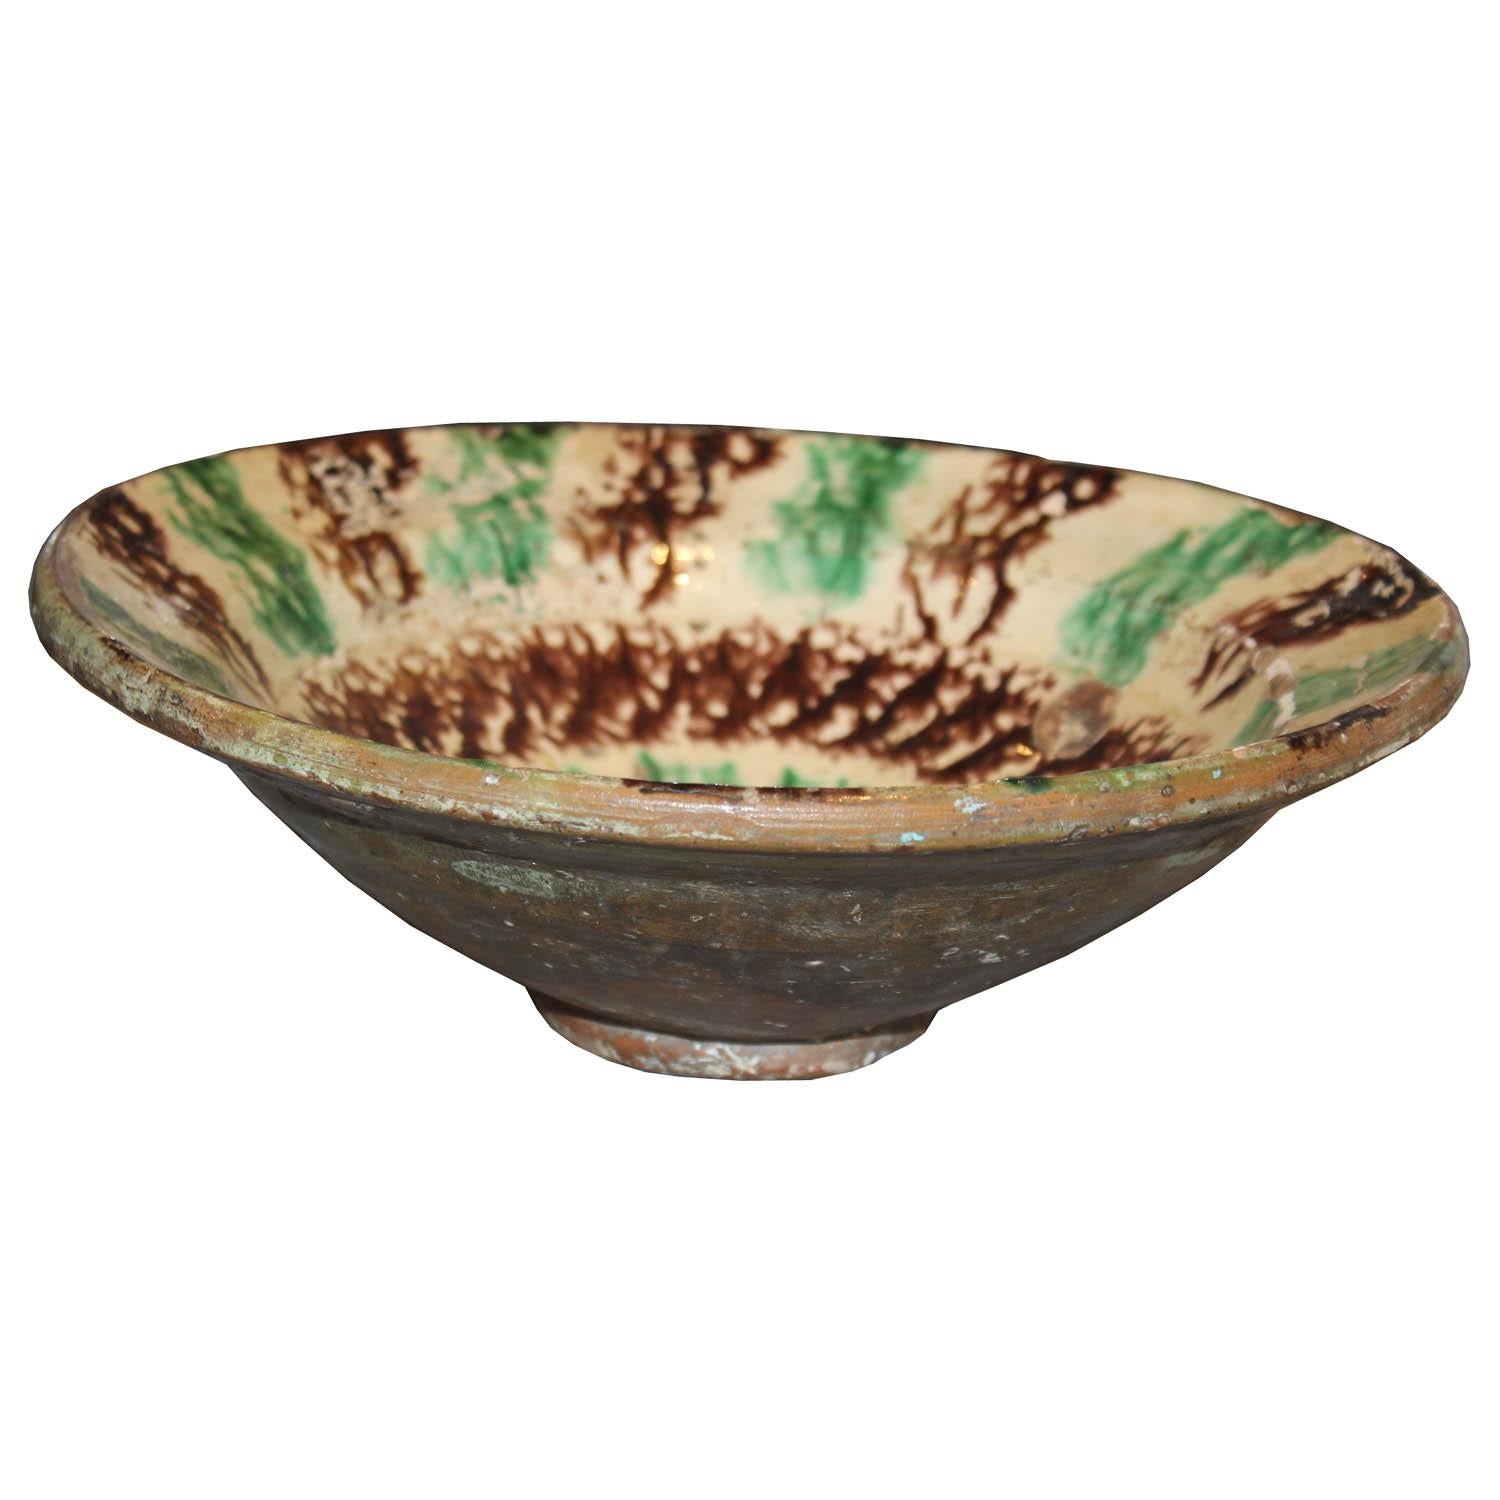 Mid-20th Century Moroccan Glazed Bowl For Sale